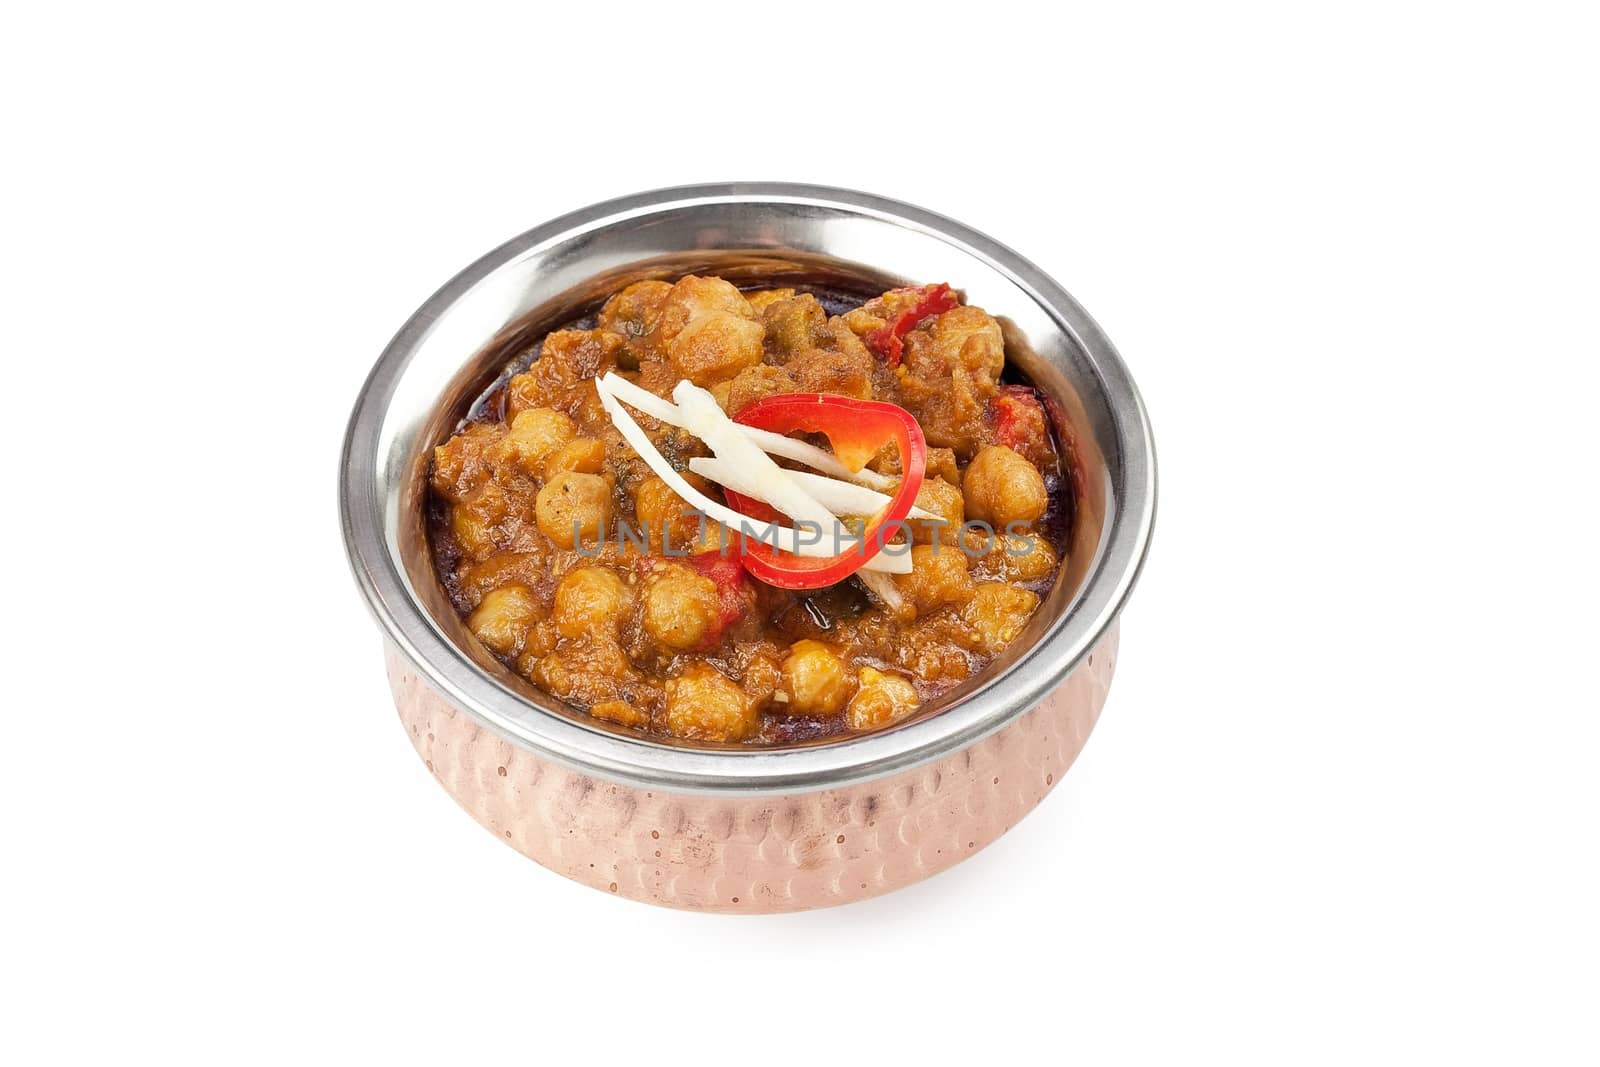 Indian Food Chickpea Curry Channa Masala On White by jaaske